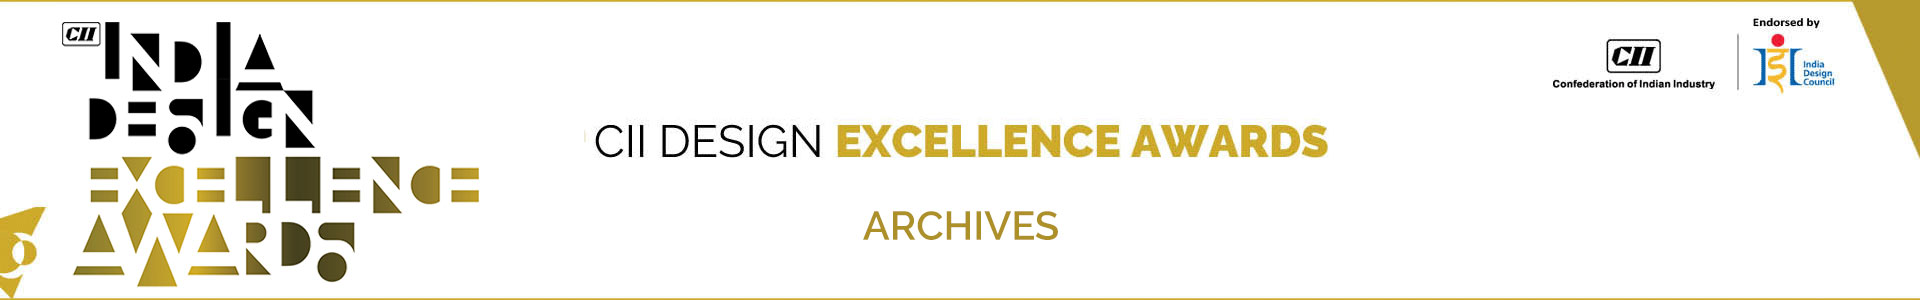 excellence-awards-archives